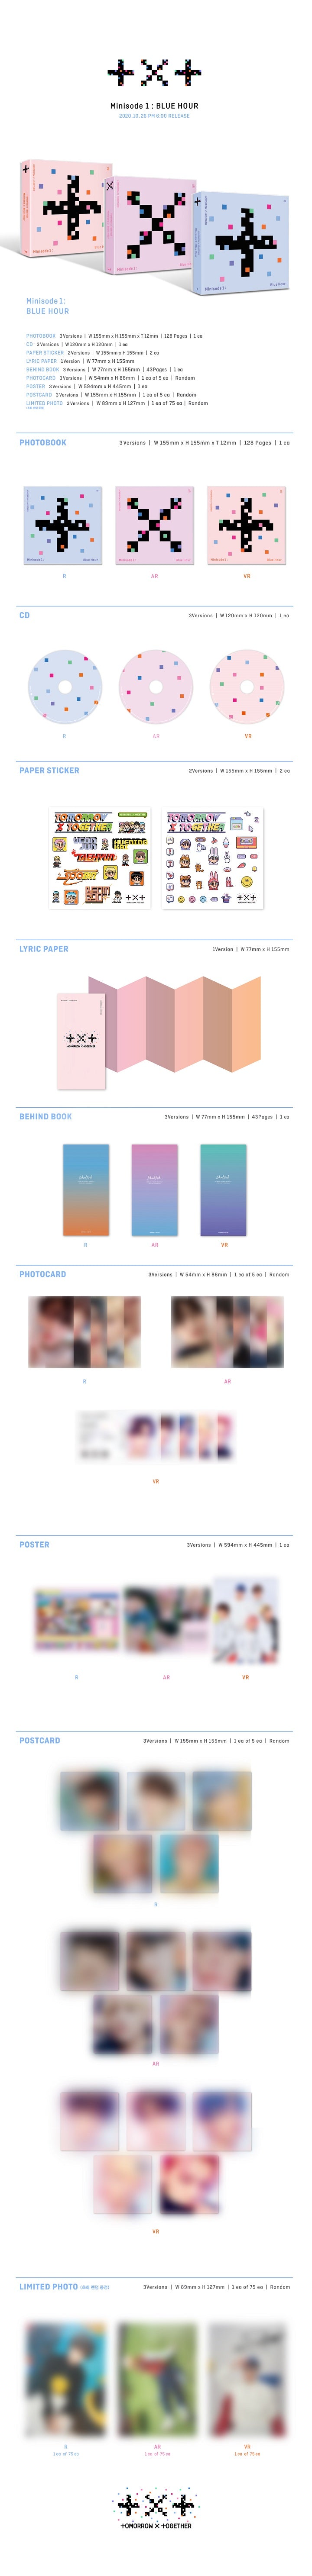 1 CD
1 Photo Book (128 pages)
2 Paper Stickers
1 Lyric Paper
1 Behind Book (43 pages)
1 Photo Card (random out of 5 types ...